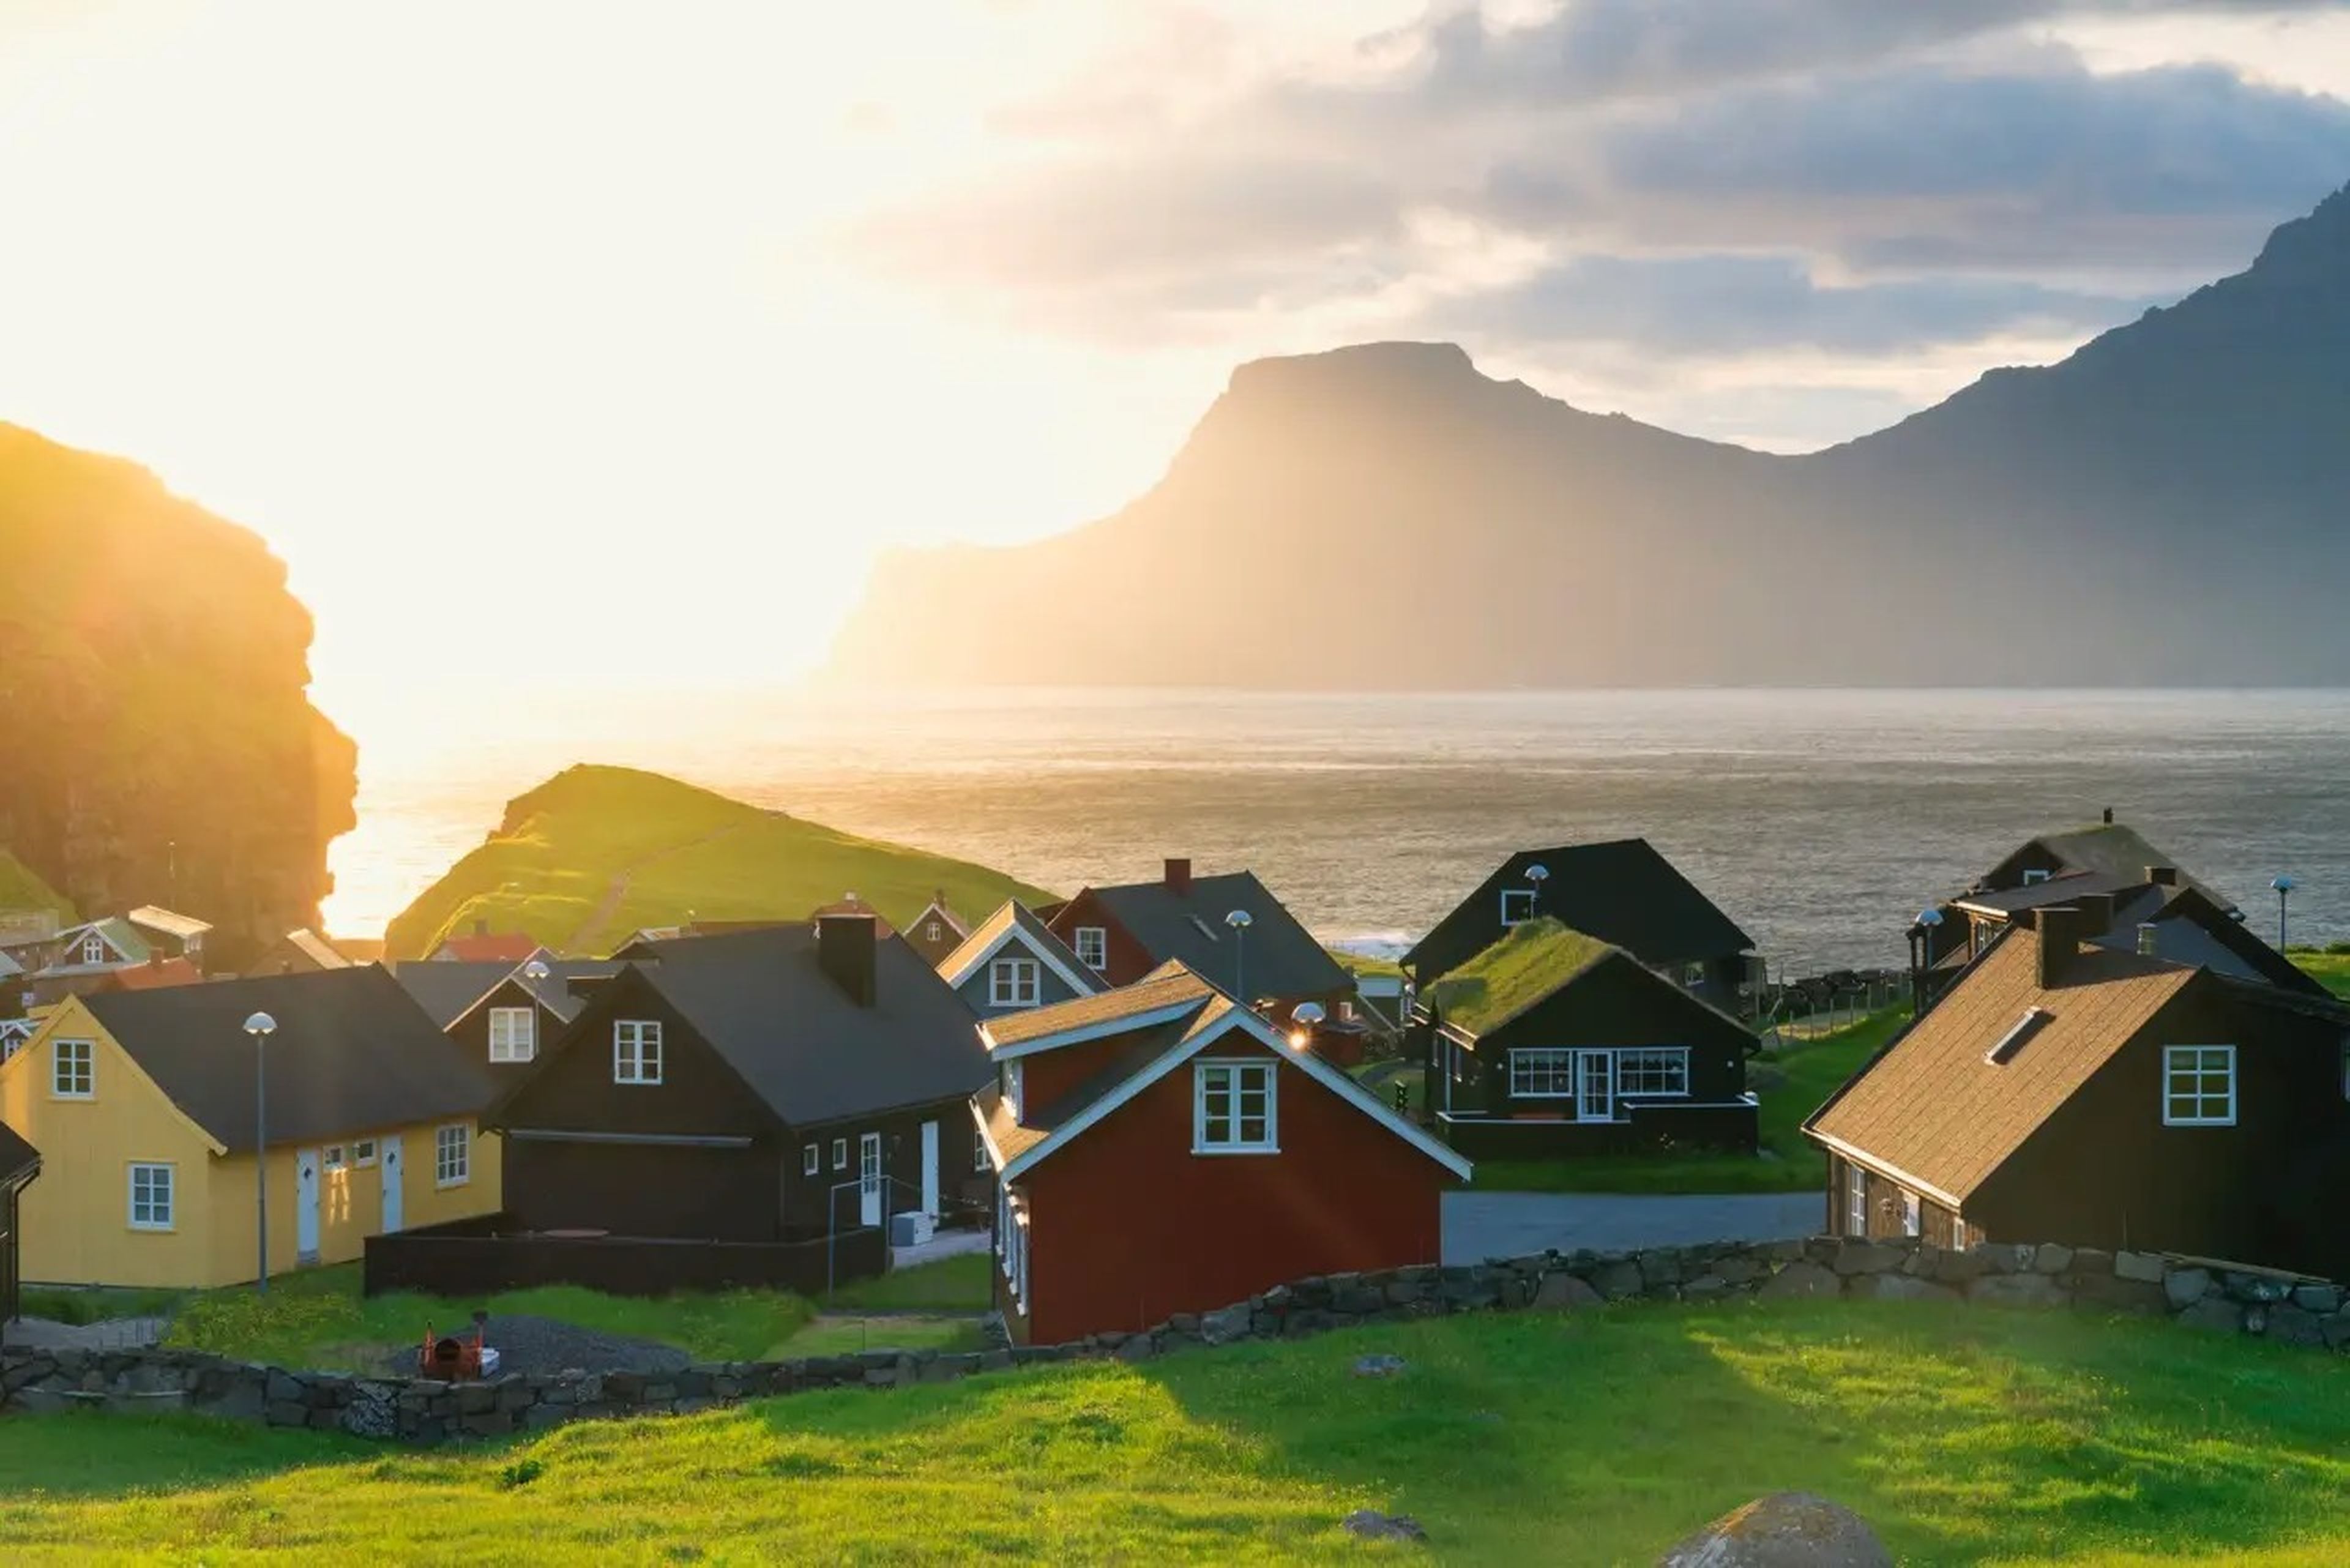 Sunrise over red and yellow seaside cottages on the Faroe Islands